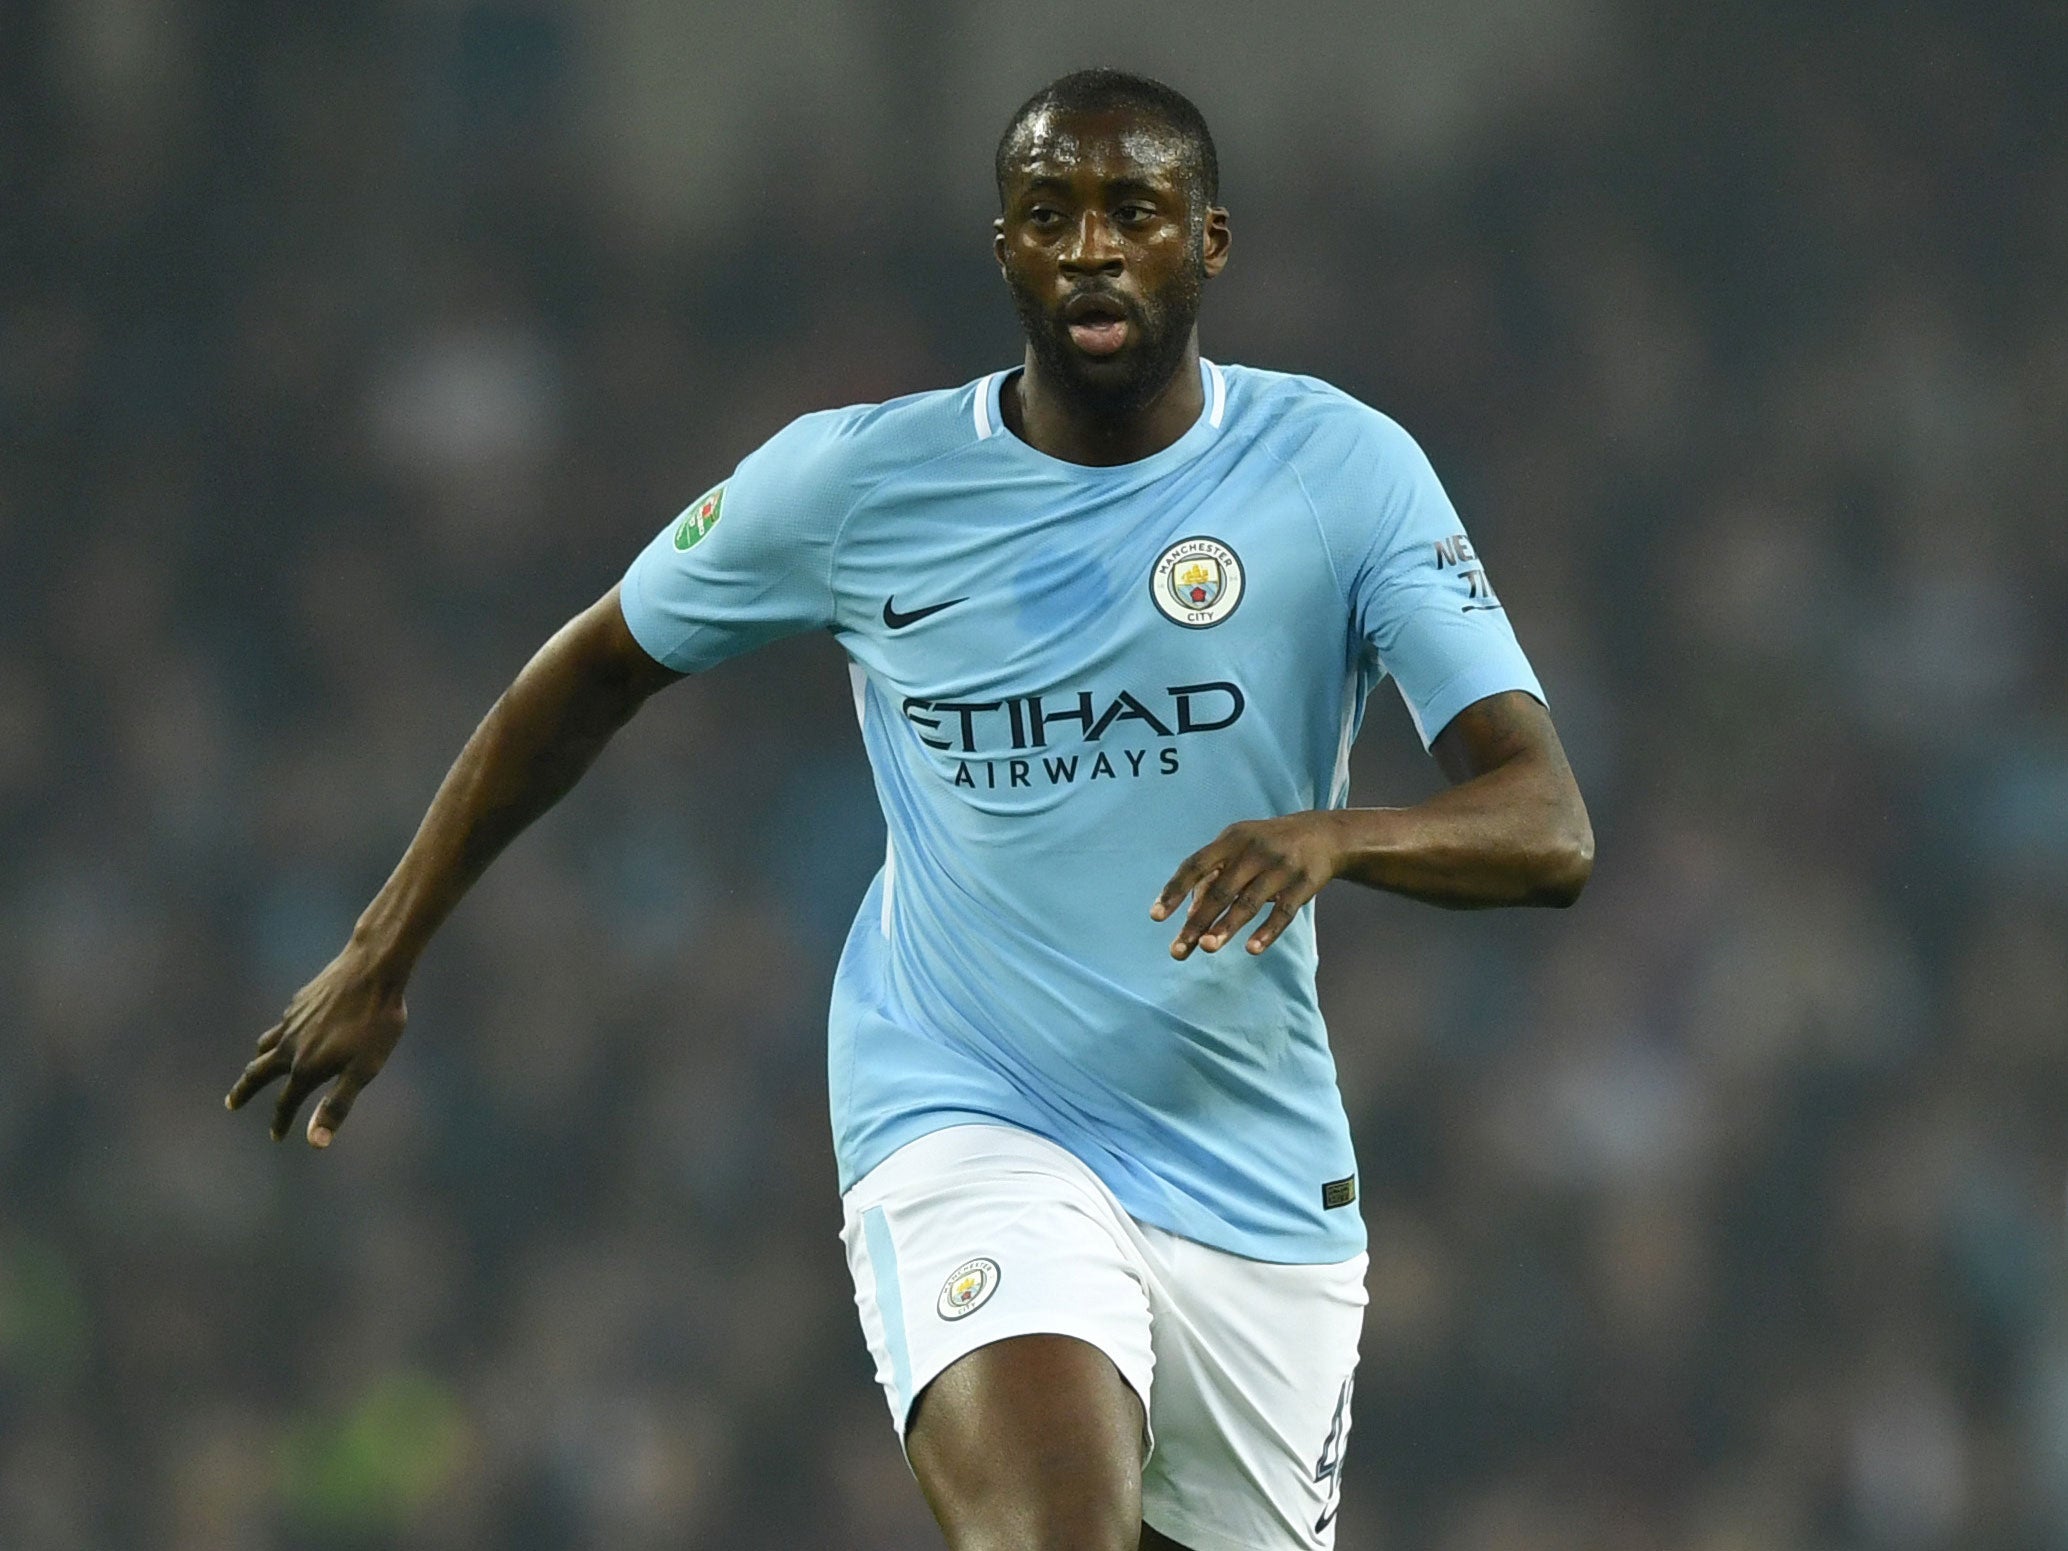 Yaya Touré has been present for every triumph of the Sheikh Mansour era